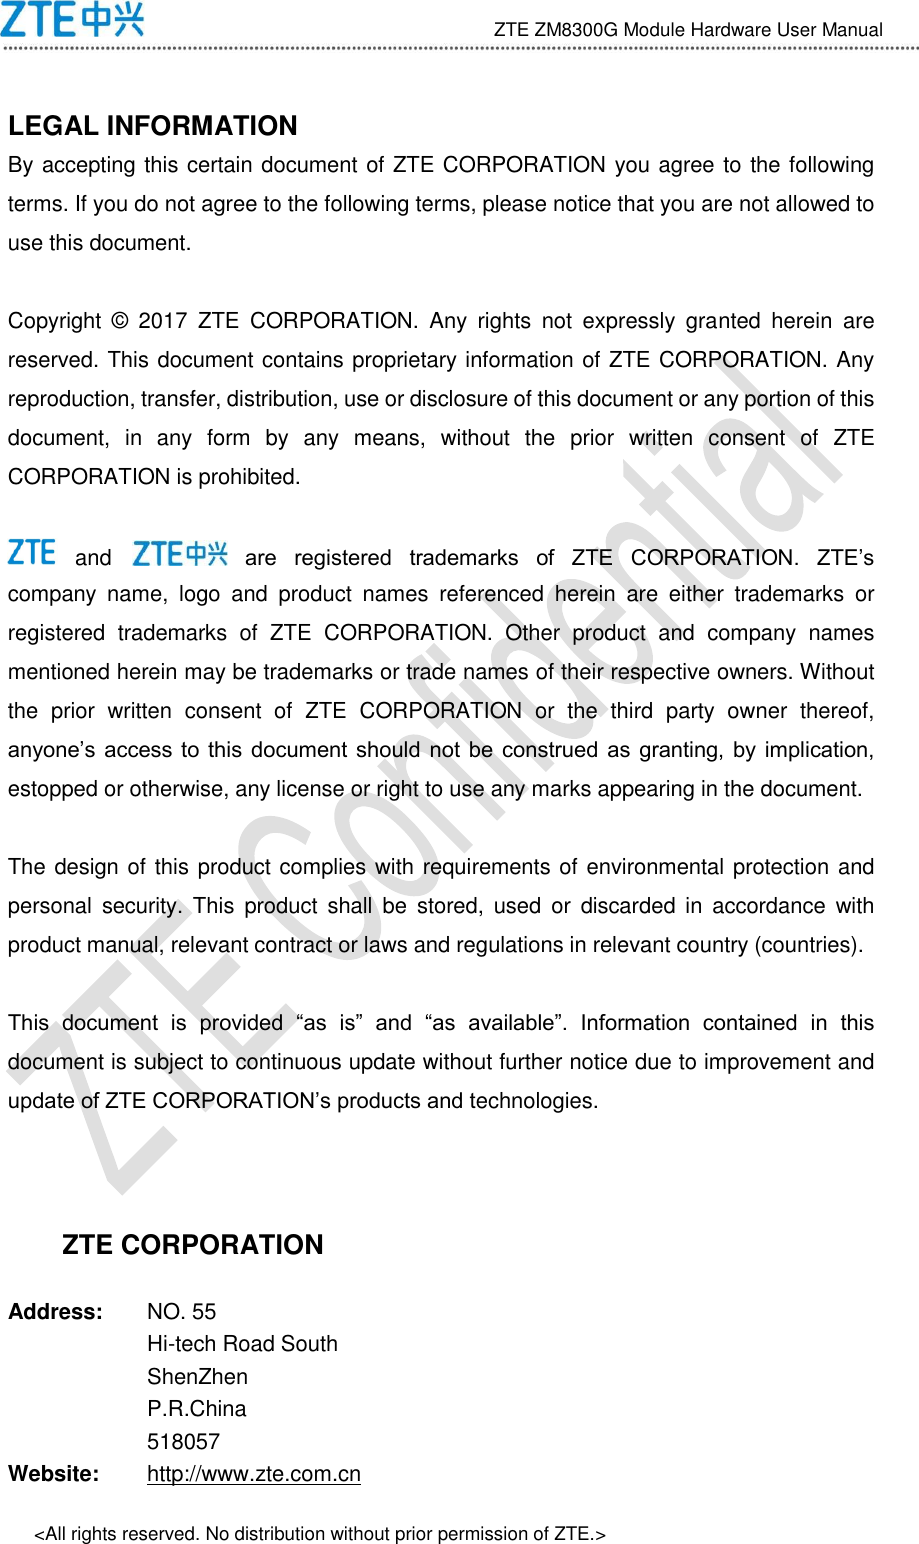                                 ZTE ZM8300G Module Hardware User Manual &lt;All rights reserved. No distribution without prior permission of ZTE.&gt;  LEGAL INFORMATION   By accepting this certain document of ZTE CORPORATION you agree to the following terms. If you do not agree to the following terms, please notice that you are not allowed to use this document.  Copyright  ©   2017  ZTE  CORPORATION.  Any  rights  not  expressly  granted  herein  are reserved. This document contains proprietary information of ZTE CORPORATION. Any reproduction, transfer, distribution, use or disclosure of this document or any portion of this document,  in  any  form  by  any  means,  without  the  prior  written  consent  of  ZTE CORPORATION is prohibited.   and   are  registered  trademarks  of  ZTE  CORPORATION.  ZTE’s company  name,  logo  and  product  names  referenced  herein  are  either  trademarks  or registered  trademarks  of  ZTE  CORPORATION.  Other  product  and  company  names mentioned herein may be trademarks or trade names of their respective owners. Without the  prior  written  consent  of  ZTE  CORPORATION  or  the  third  party  owner  thereof, anyone’s access  to  this  document should  not  be  construed  as  granting, by  implication, estopped or otherwise, any license or right to use any marks appearing in the document.  The design of this product complies with requirements of environmental protection and personal  security.  This  product  shall  be  stored,  used  or  discarded in  accordance  with product manual, relevant contract or laws and regulations in relevant country (countries).  This  document  is  provided  “as  is”  and  “as  available”.  Information  contained  in  this document is subject to continuous update without further notice due to improvement and update of ZTE CORPORATION’s products and technologies.   ZTE CORPORATION Address: NO. 55 Hi-tech Road South ShenZhen P.R.China 518057 Website: http://www.zte.com.cn 